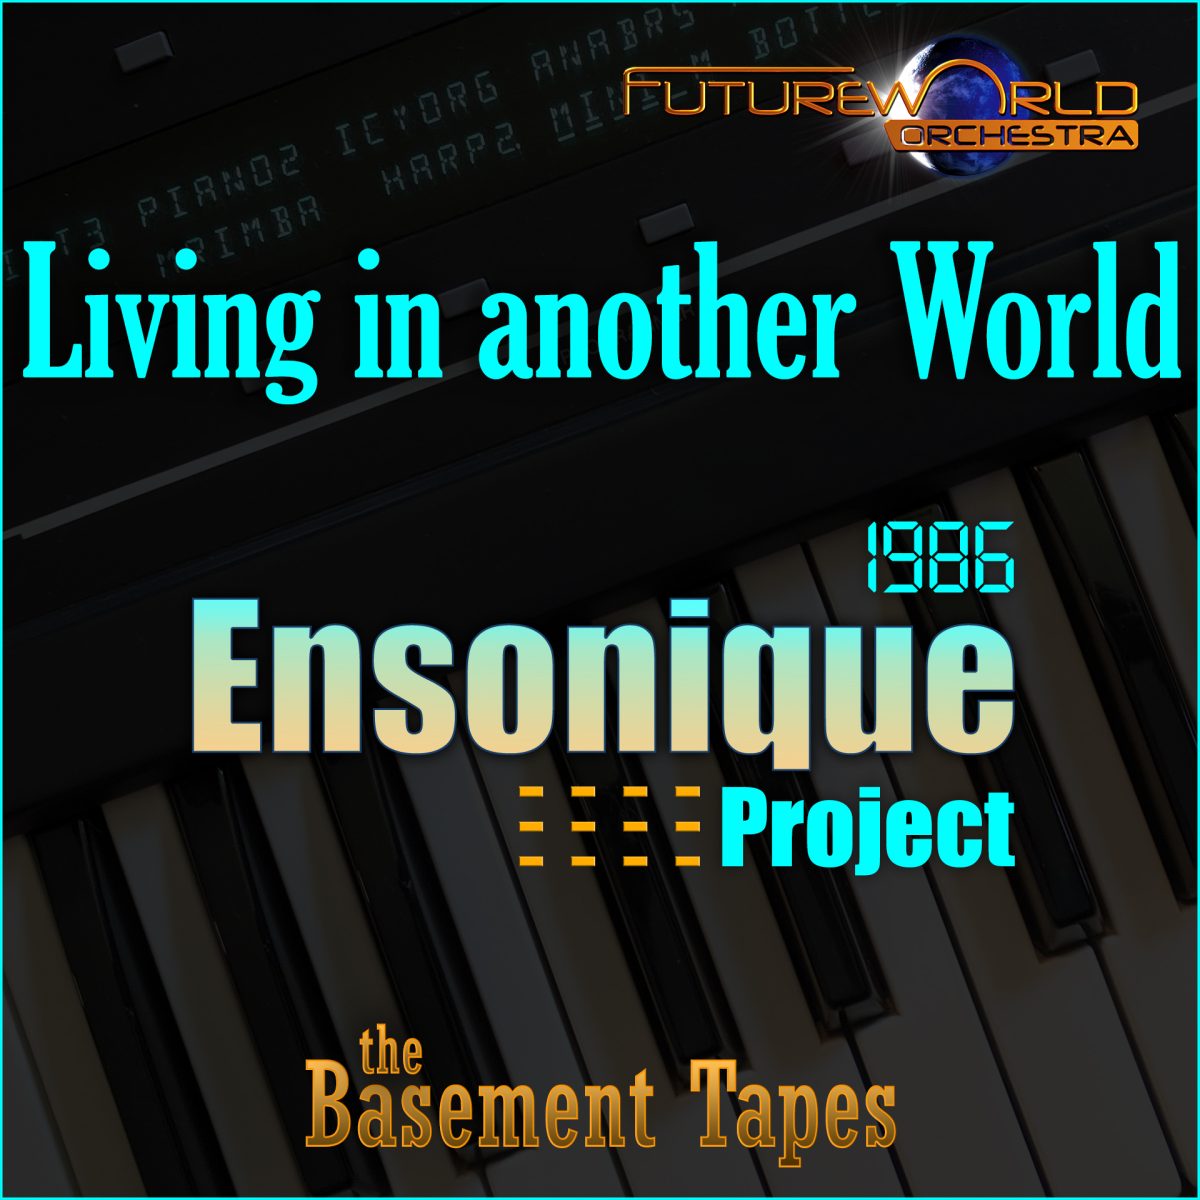 Ensonique - Playlist Image - Living in another World